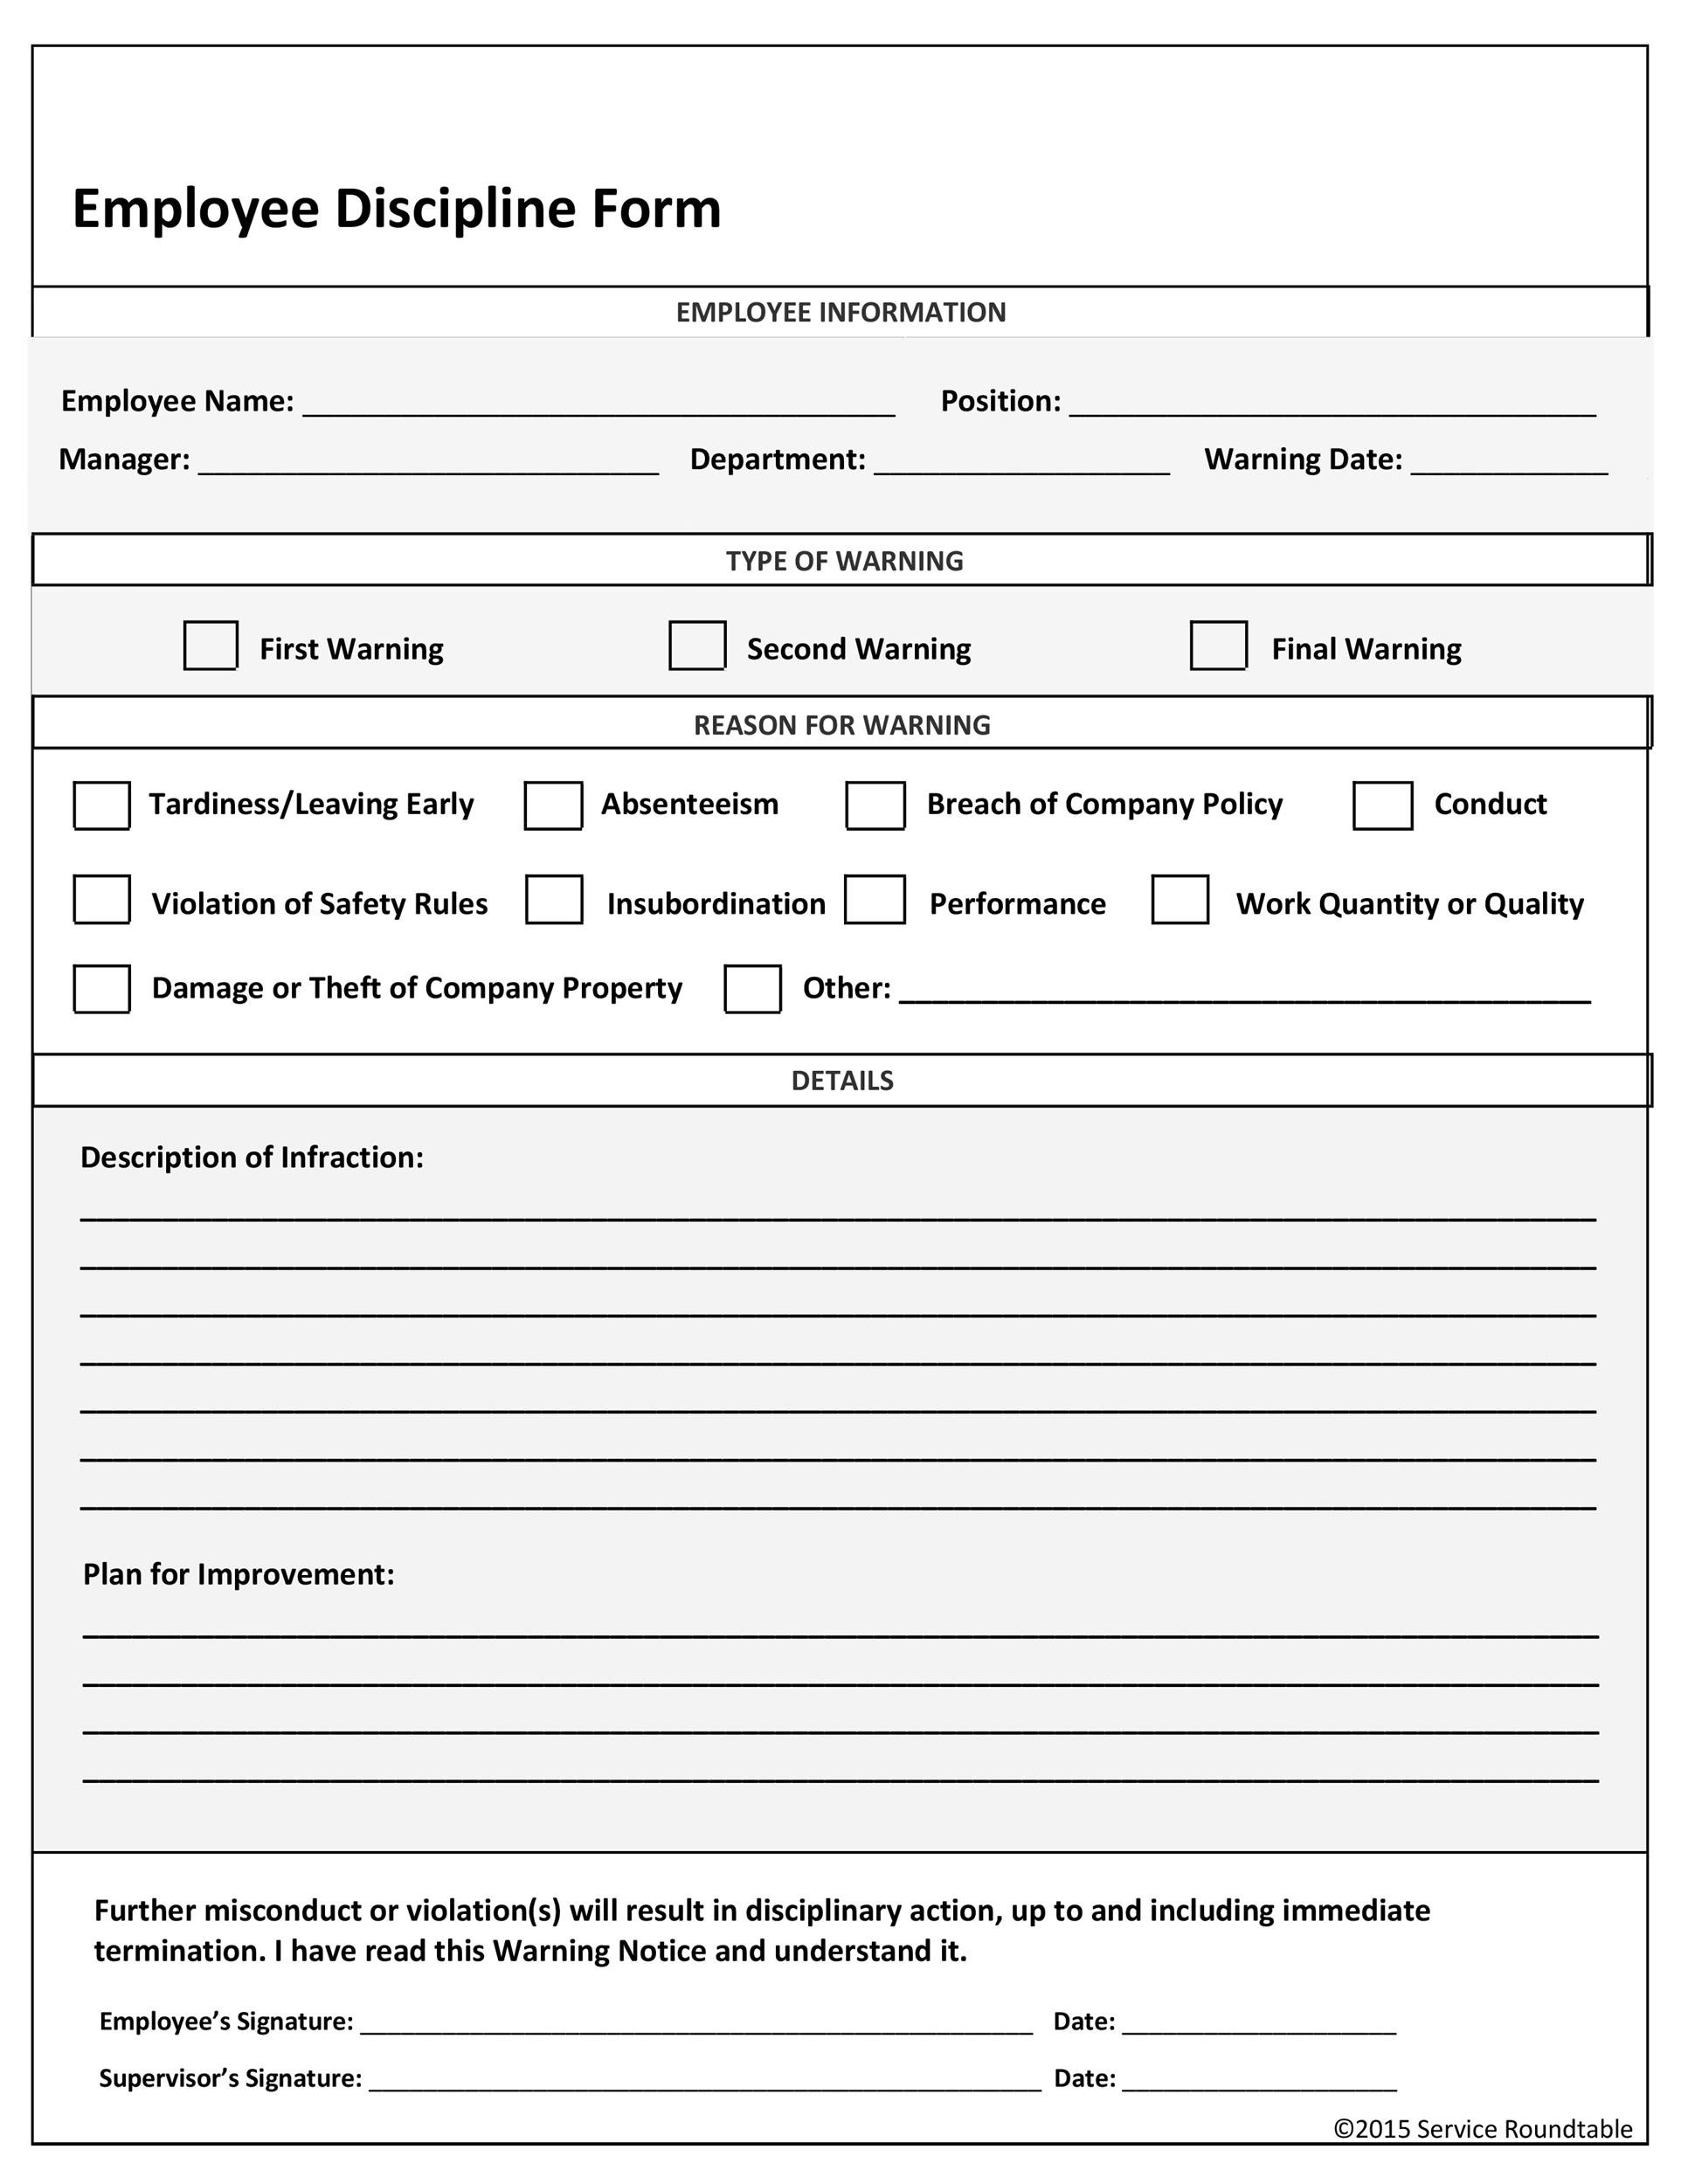 printable-disciplinary-action-form